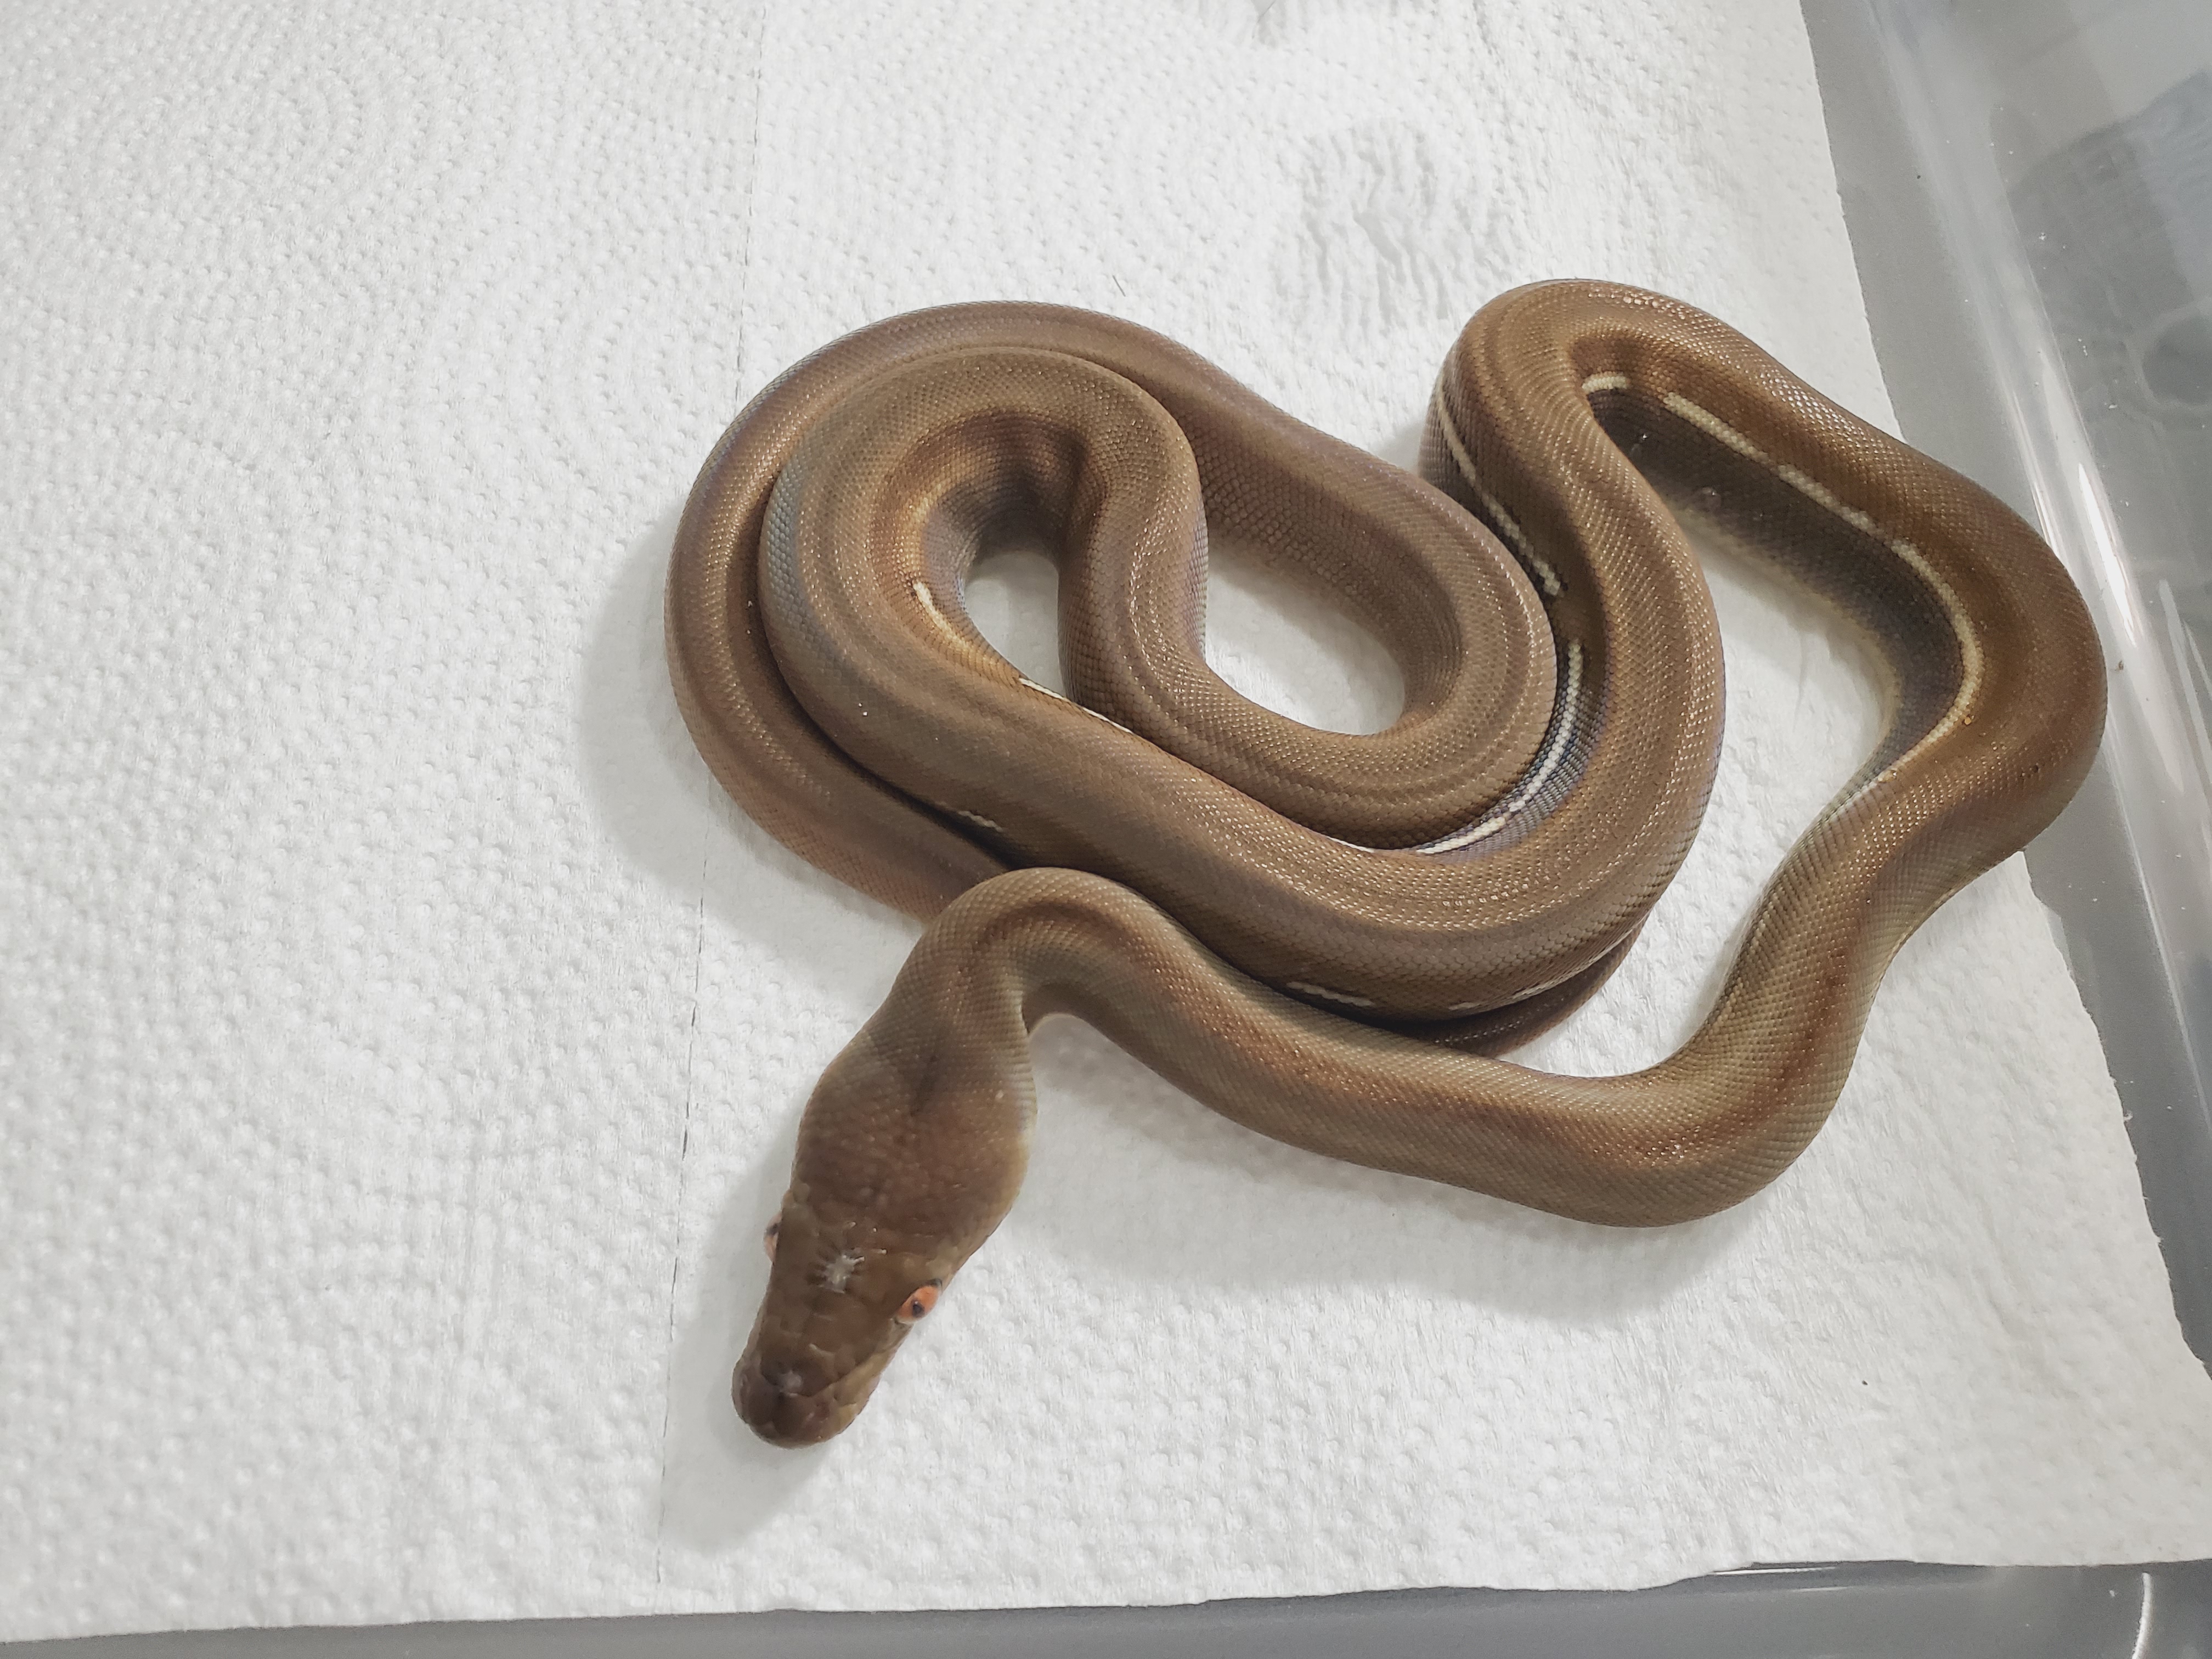 Titanium Reticulated Python by LowCountry Retic